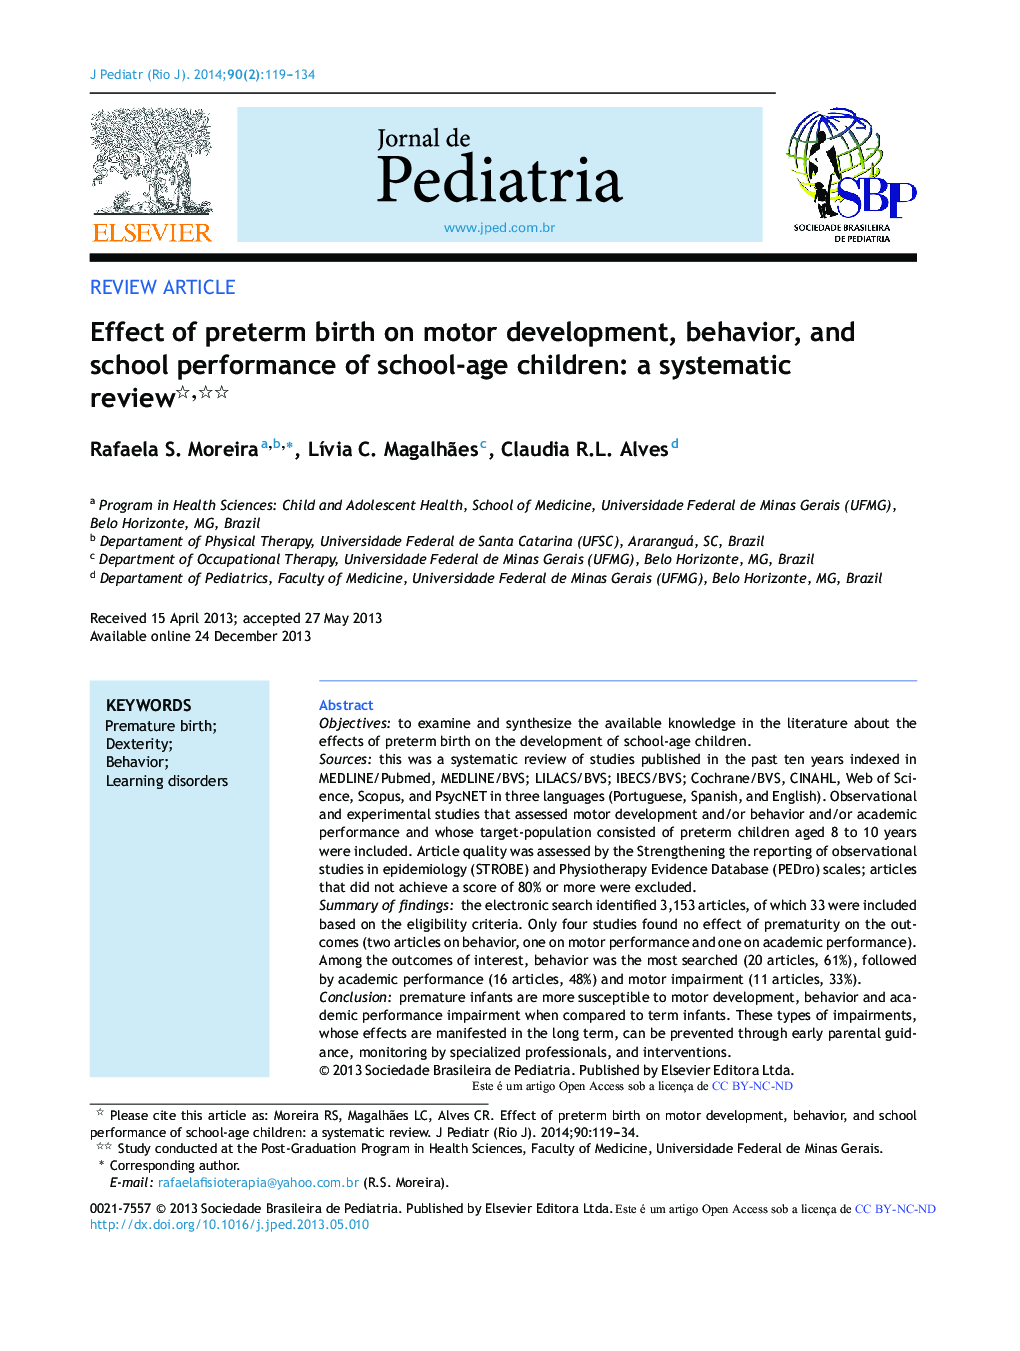 Effect of preterm birth on motor development, behavior, and school performance of school‐age children: a systematic review 